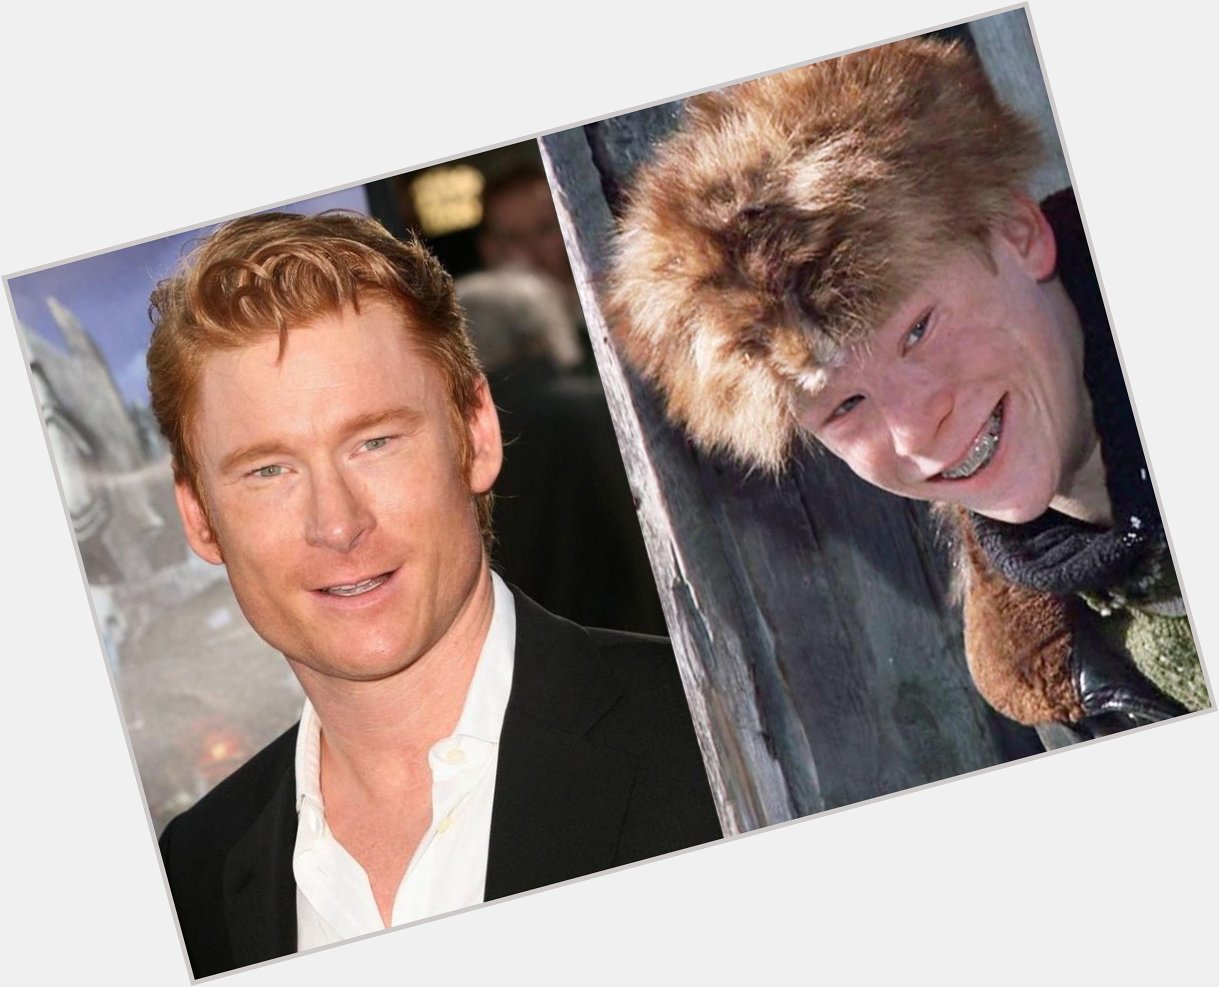 Happy 51st Birthday to Zack Ward! The actor who played Scut Farkus in A Christmas Story. 